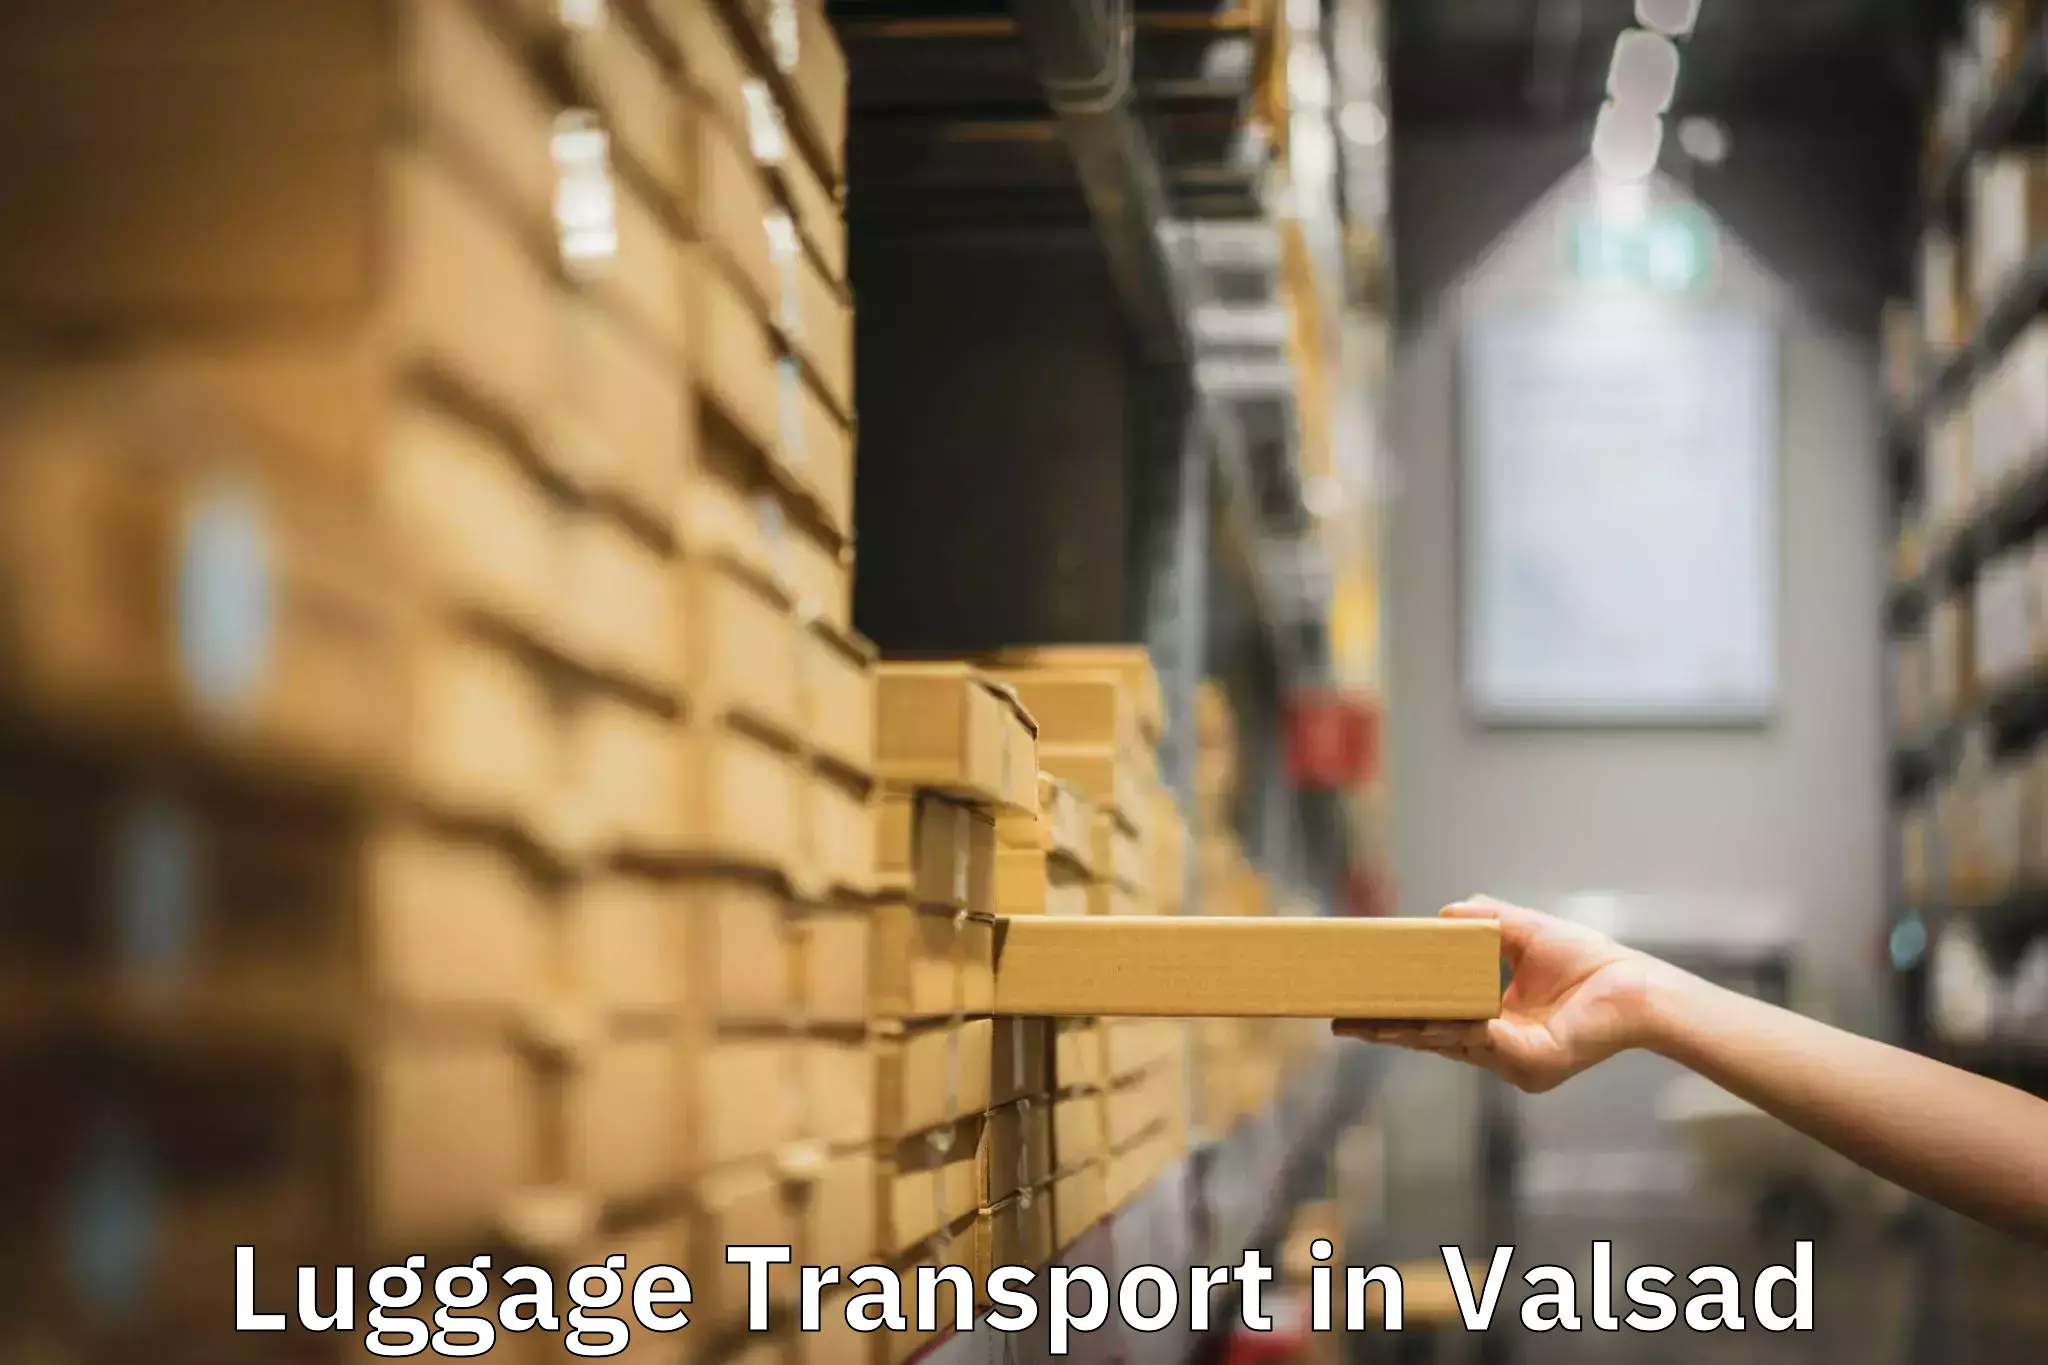 Luggage shipment tracking in Valsad